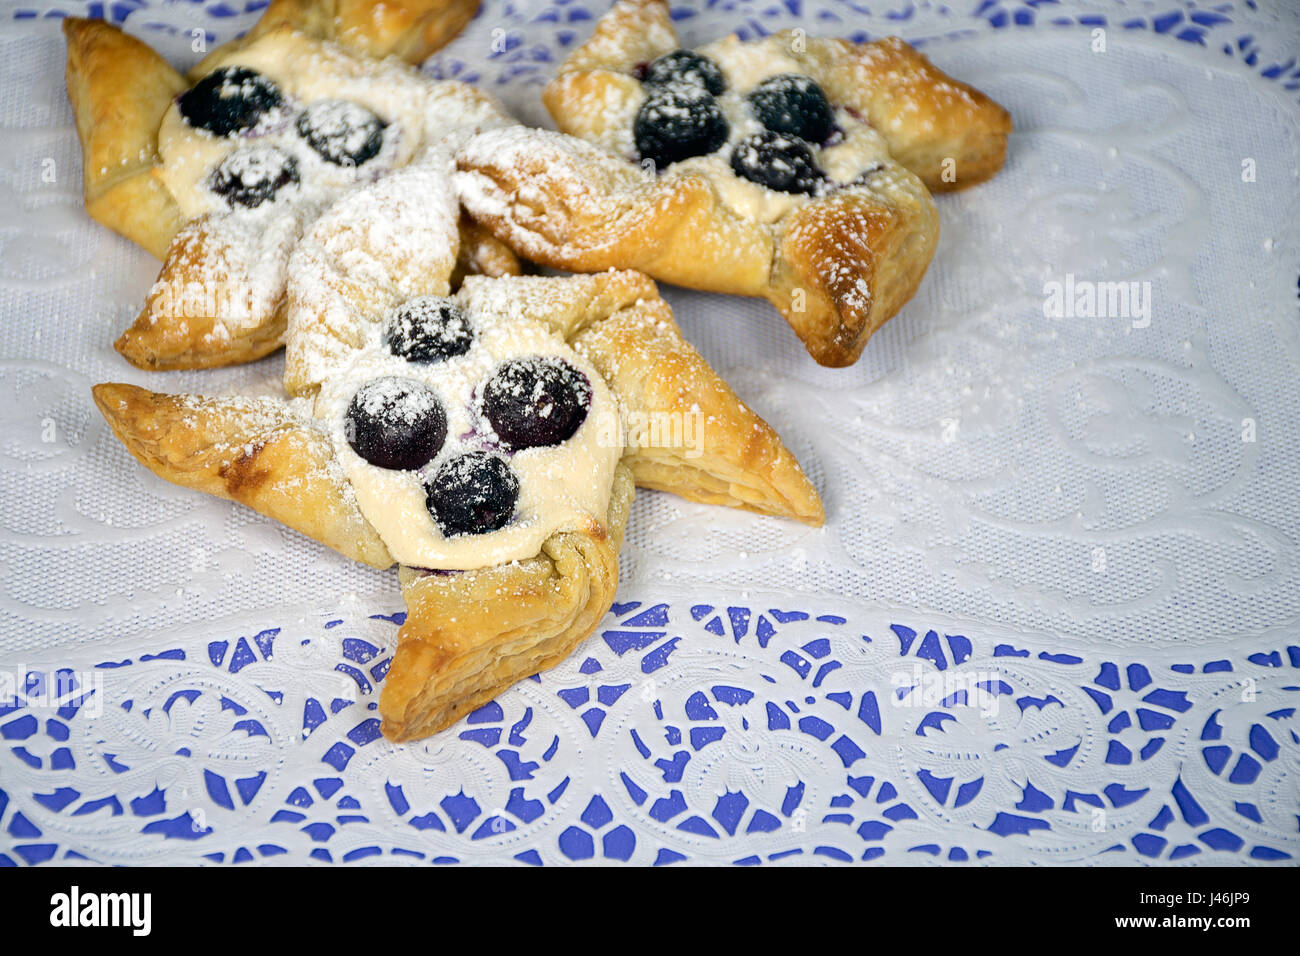 puff pastry pinwheels with blueberries and powdered sugar on paper lace doily Stock Photo